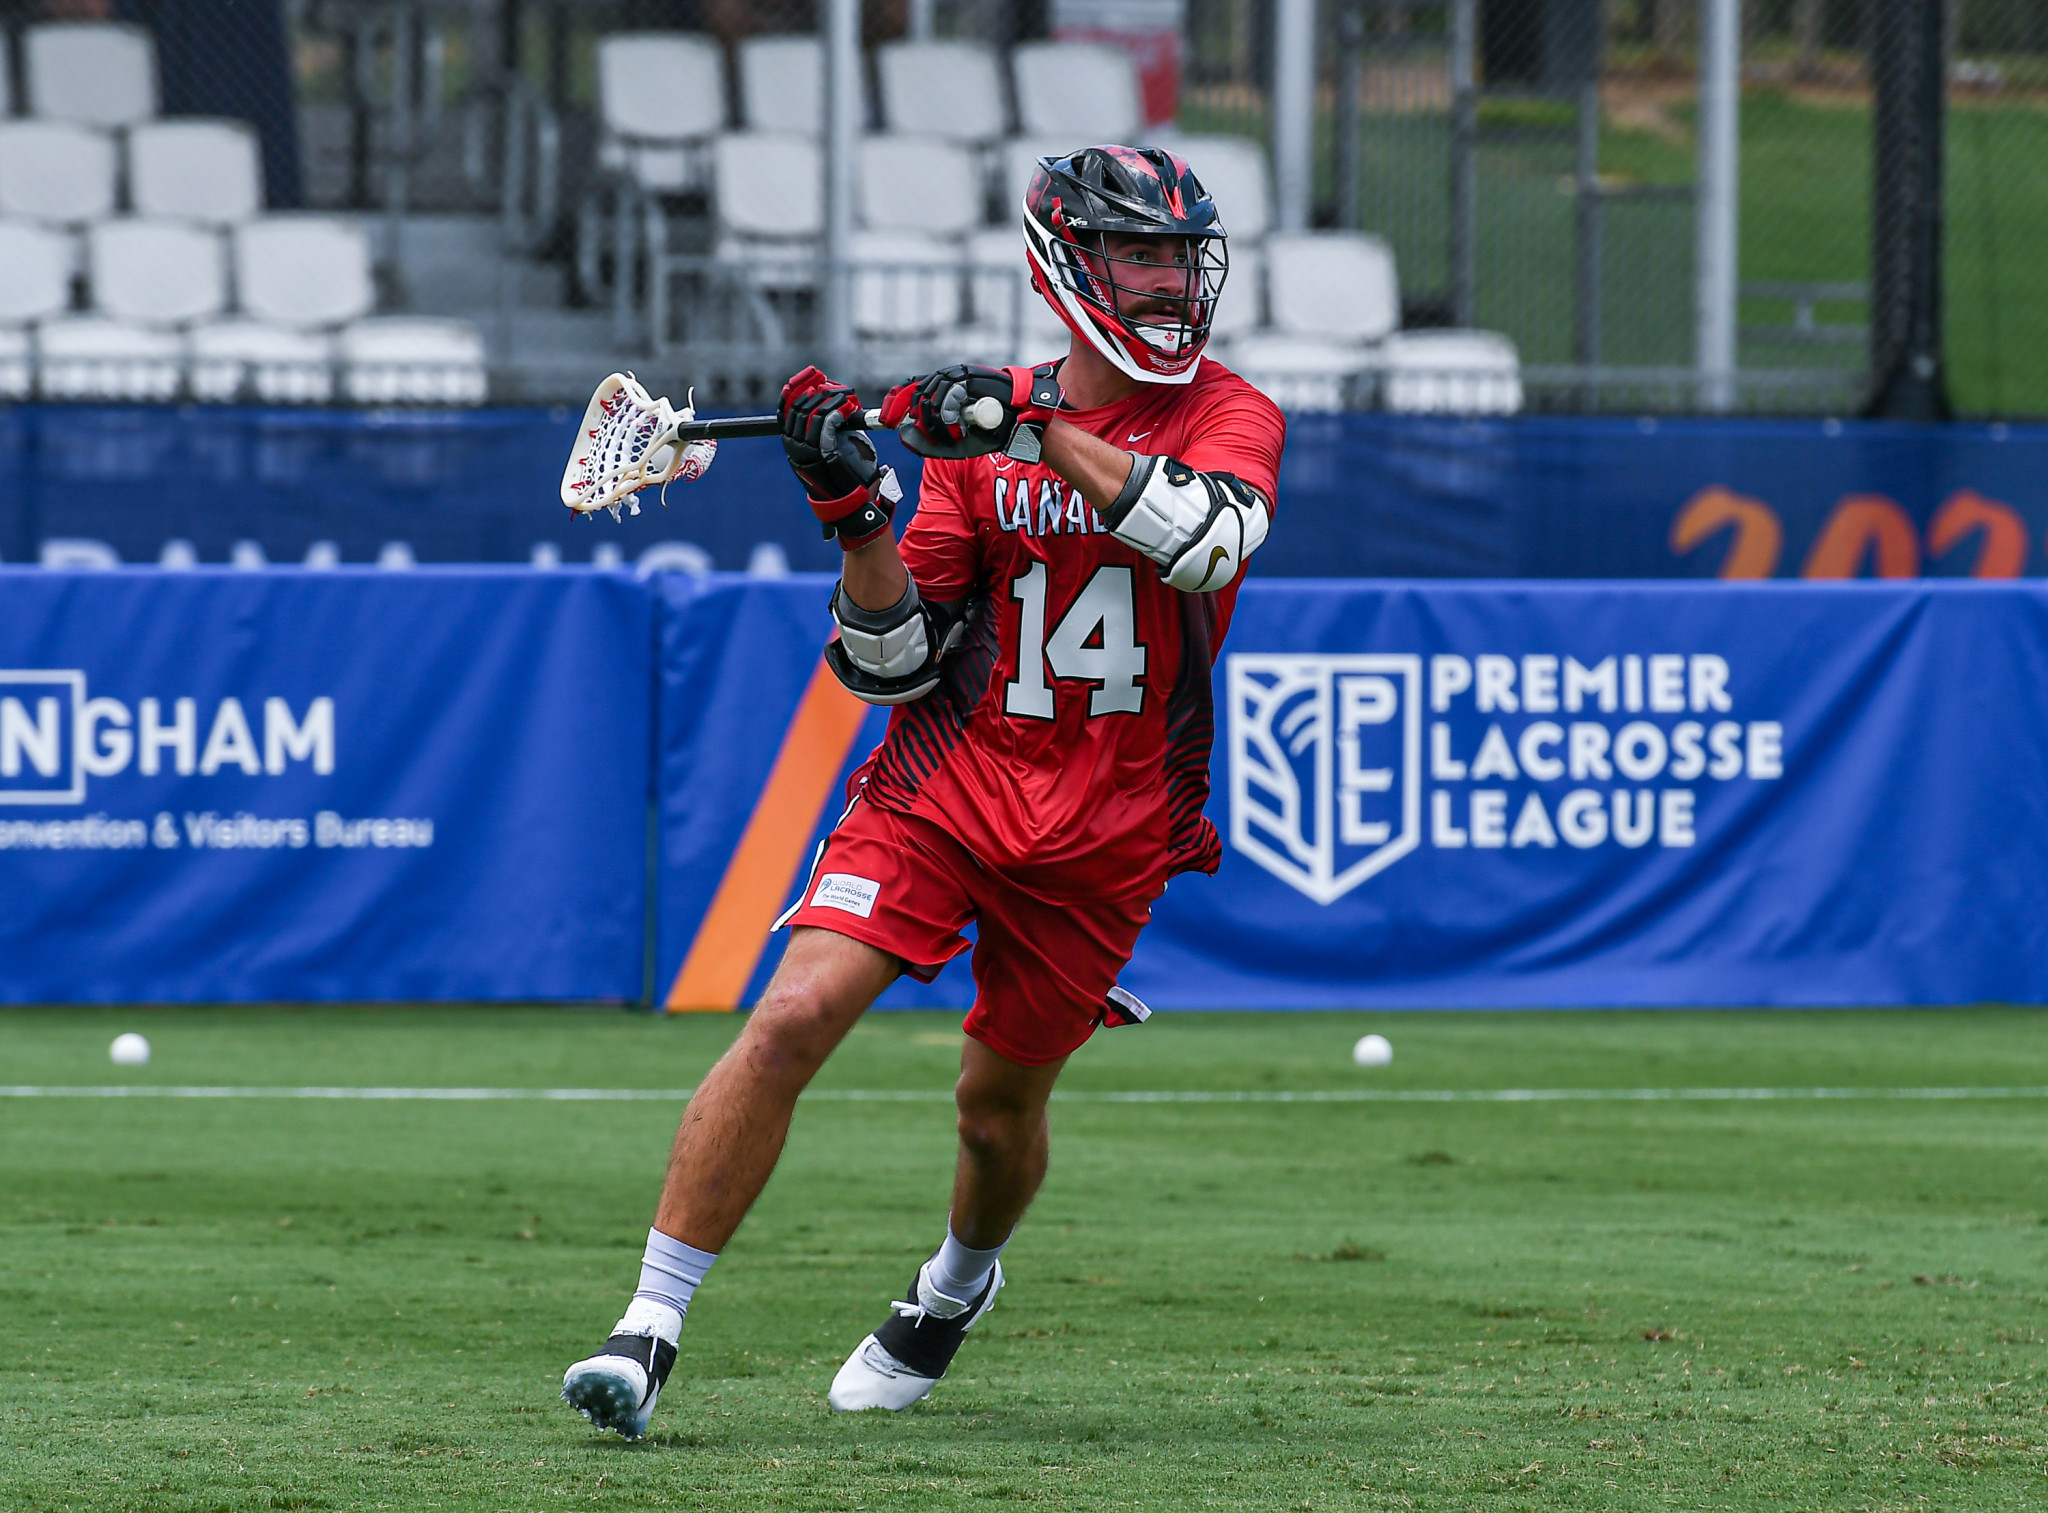 Canada beat hosts US to earn men's lacrosse gold at Birmingham 2022 World Games